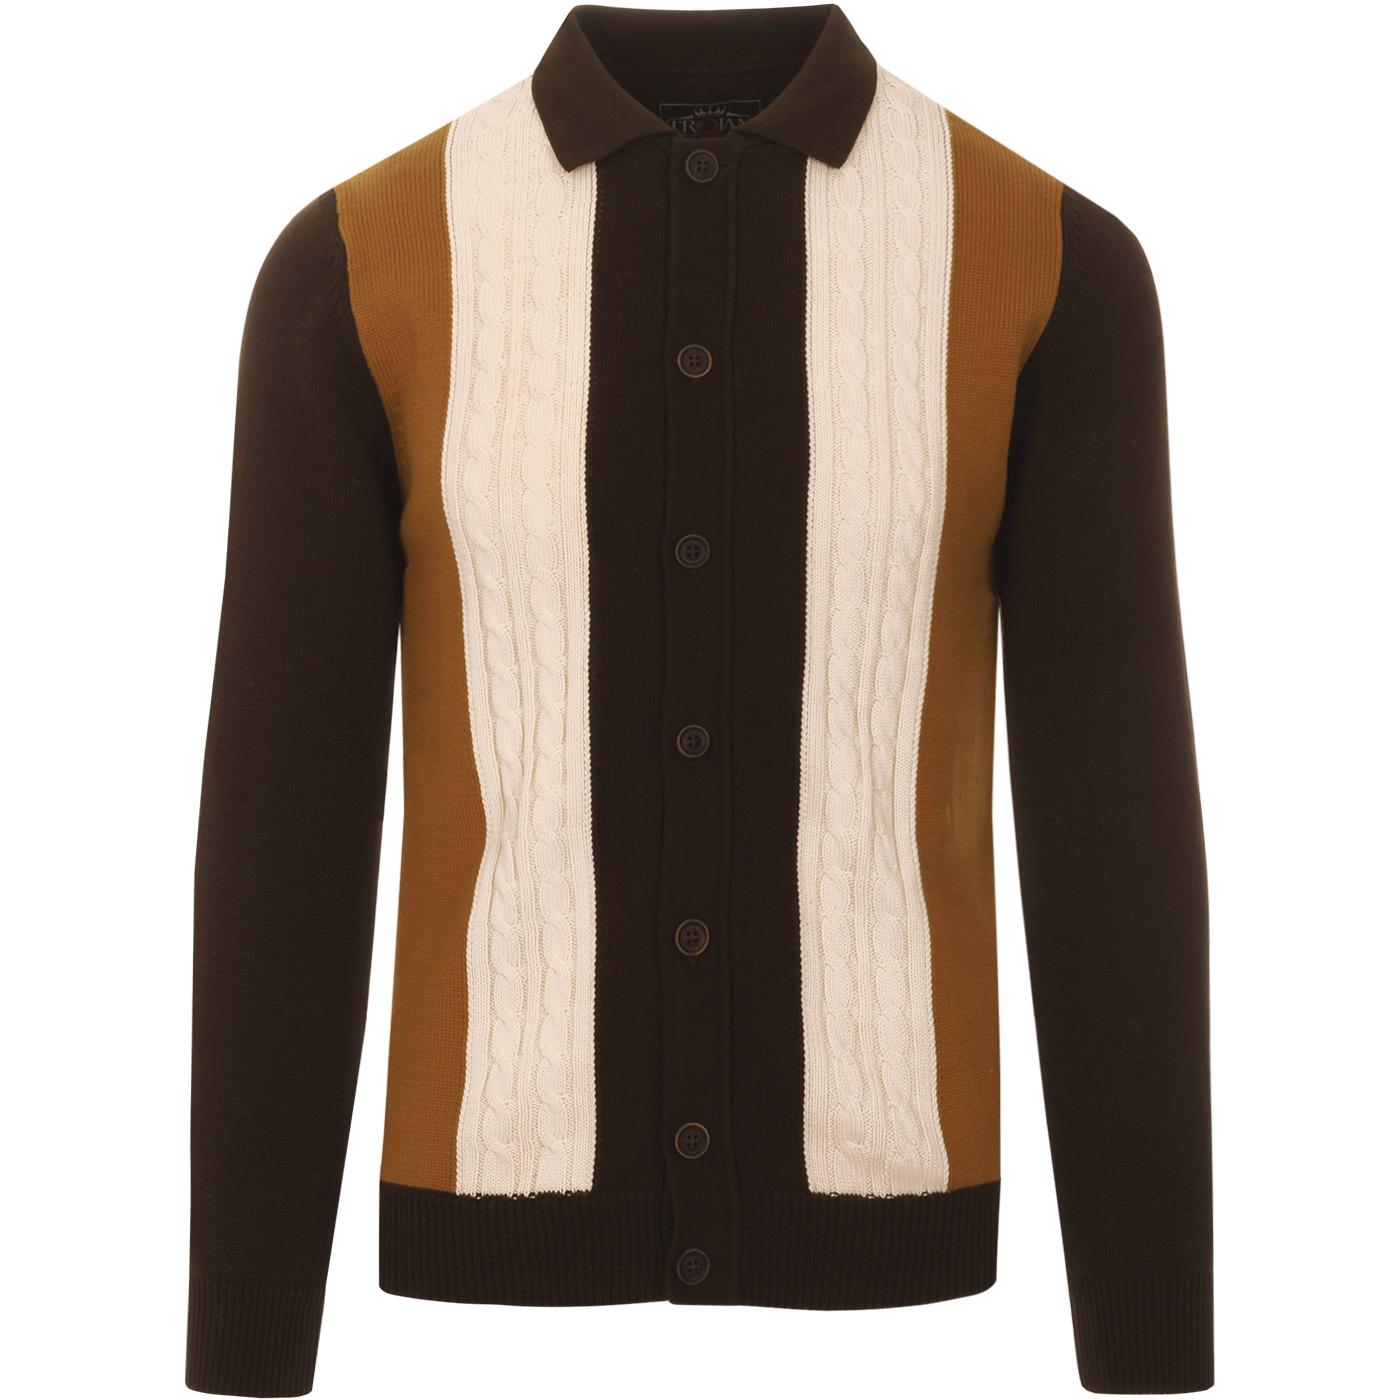 TROJAN RECORDS 60s Mod Cable Knit Polo Cardigan Brown